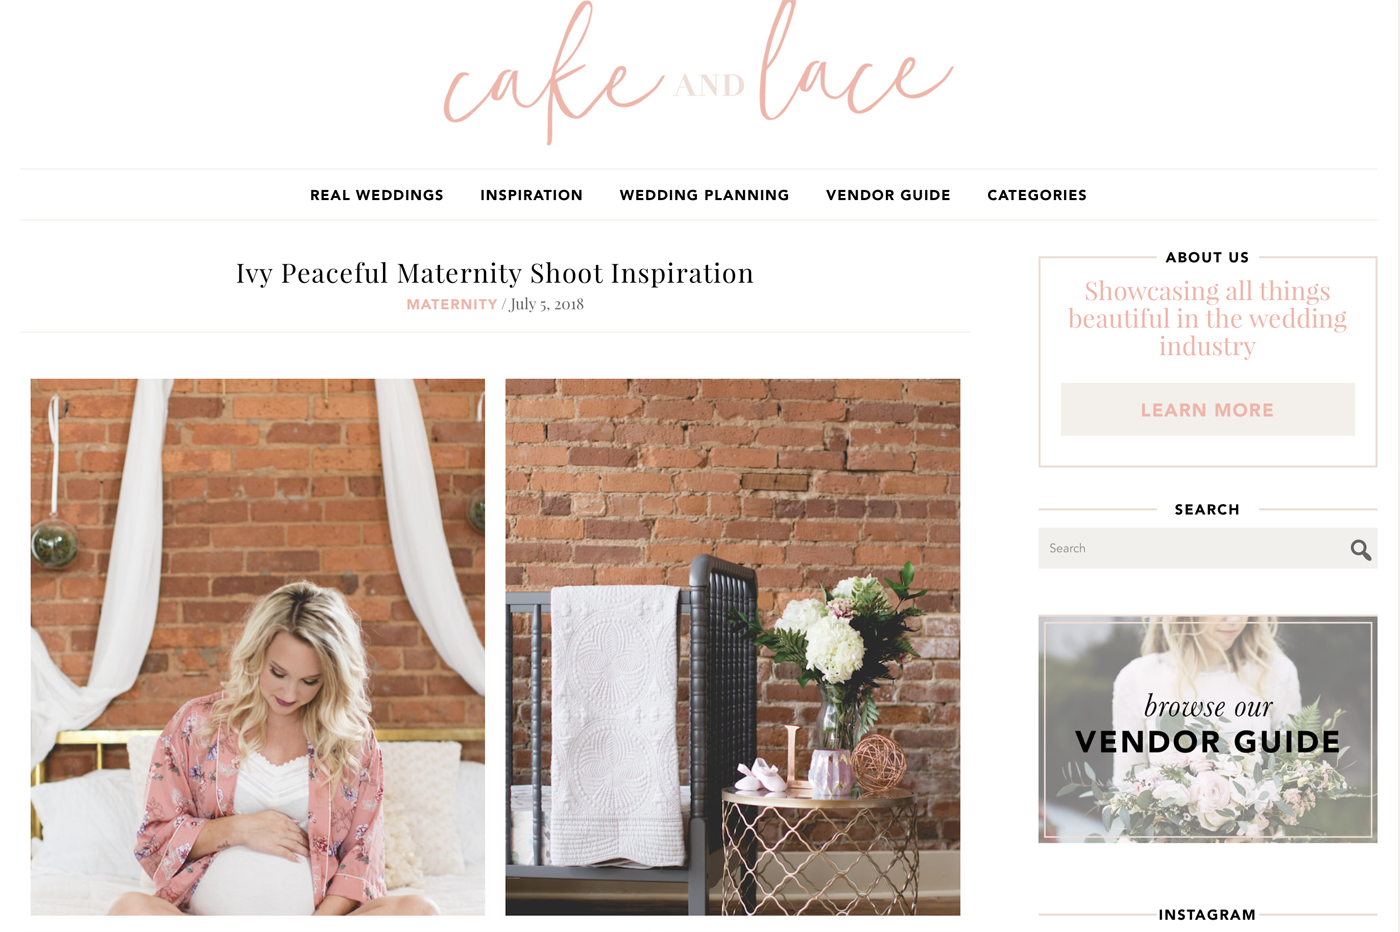 Cake and Lace photography feature